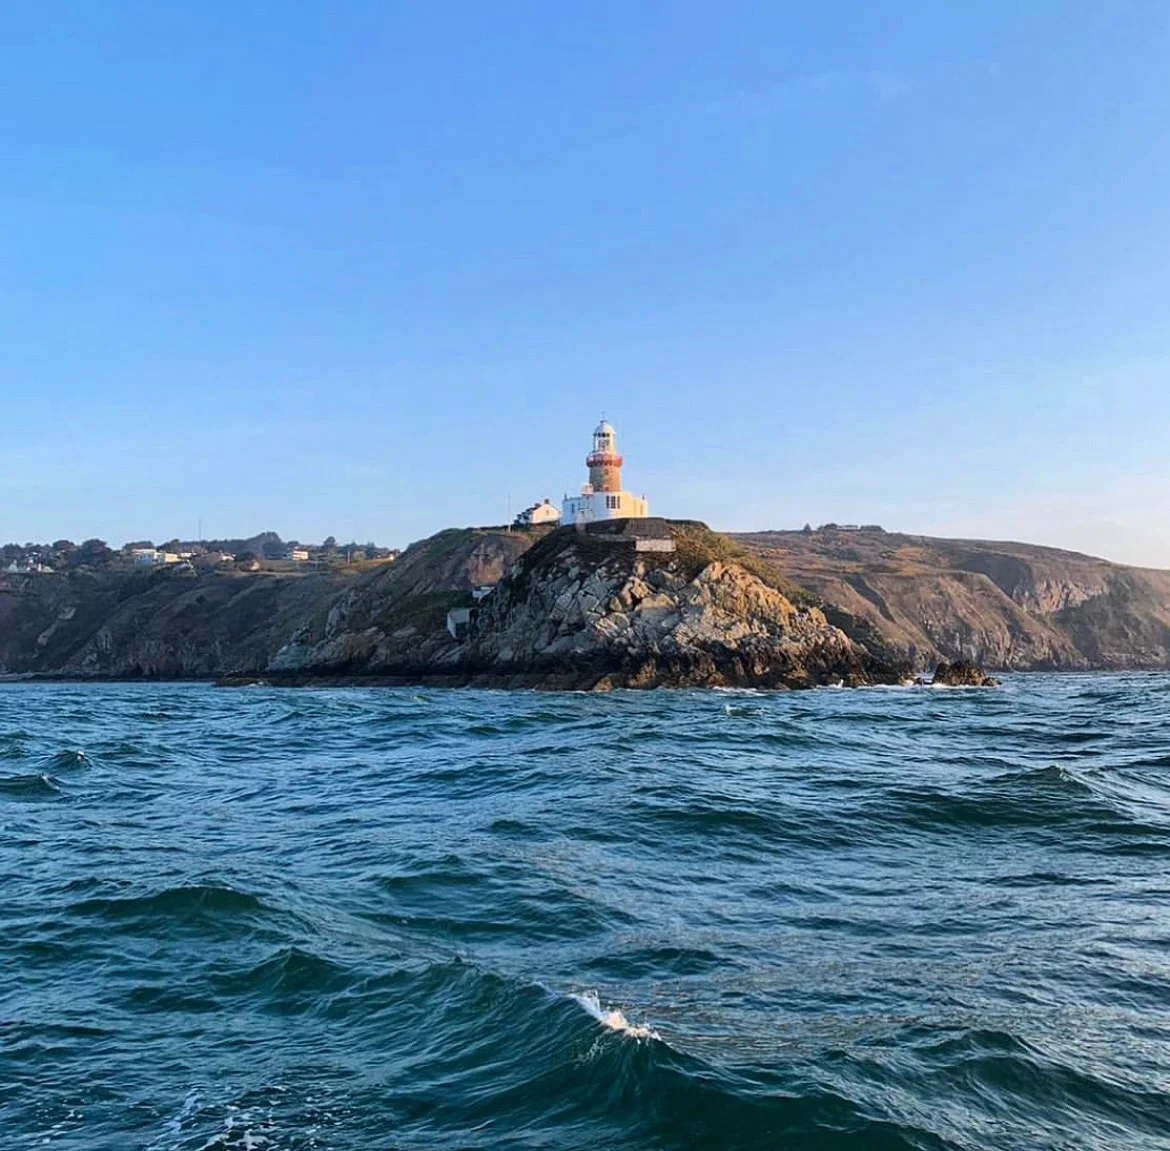 Cruise & Dine Delights: A Culinary Adventure in Howth